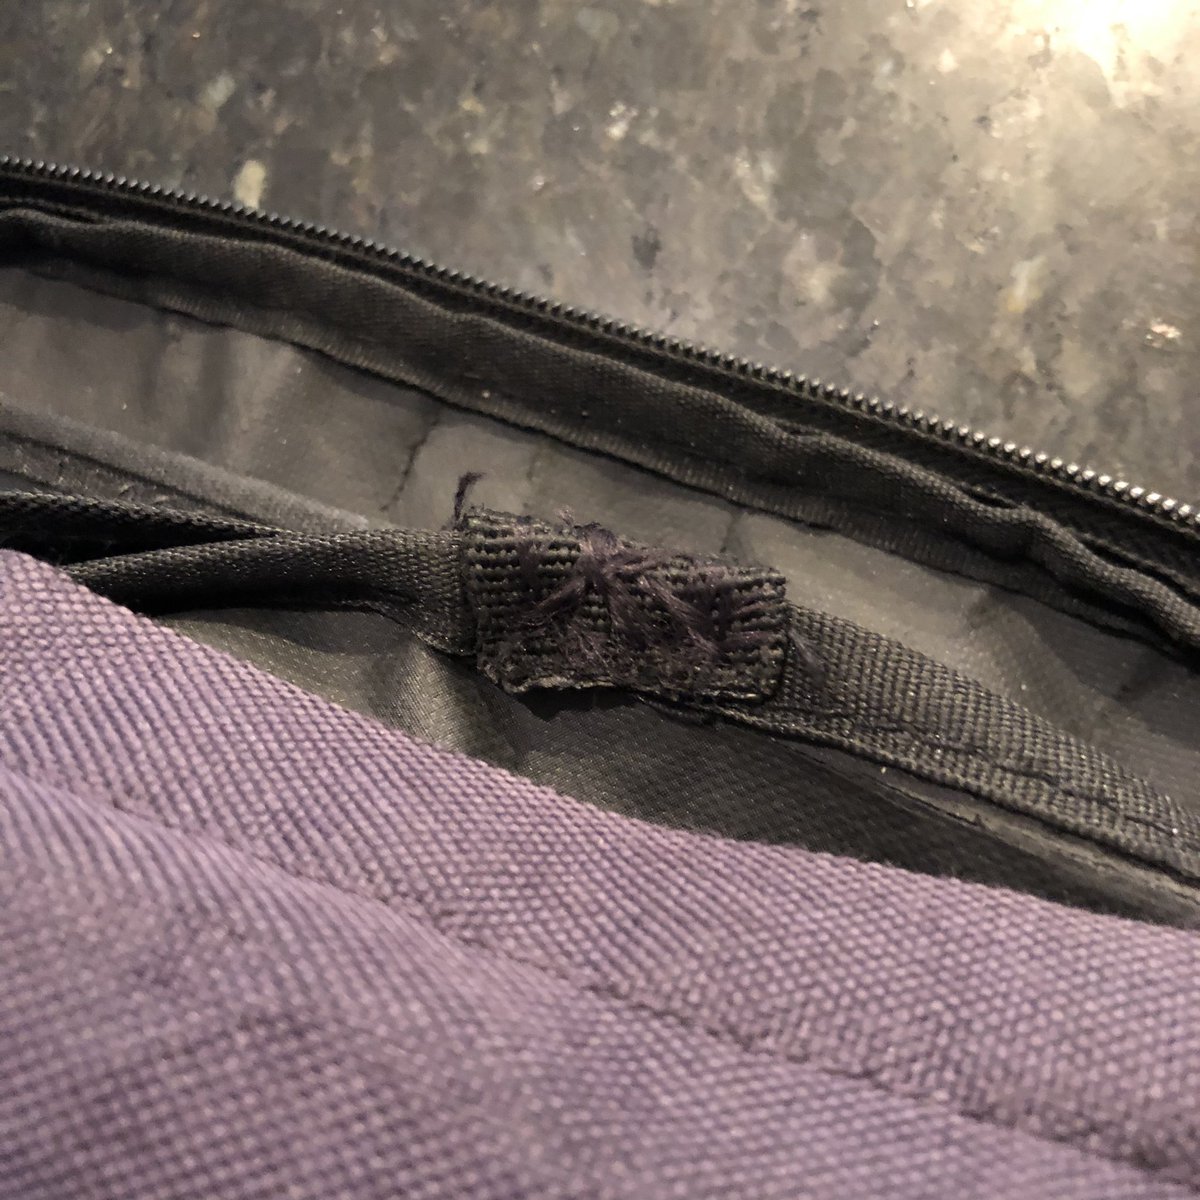 My sewing skills are self-taught from attaching patches to jean jackets. I pulled the handle through and folded it over so each stitch would pass through the handle twice and the bag seam once.